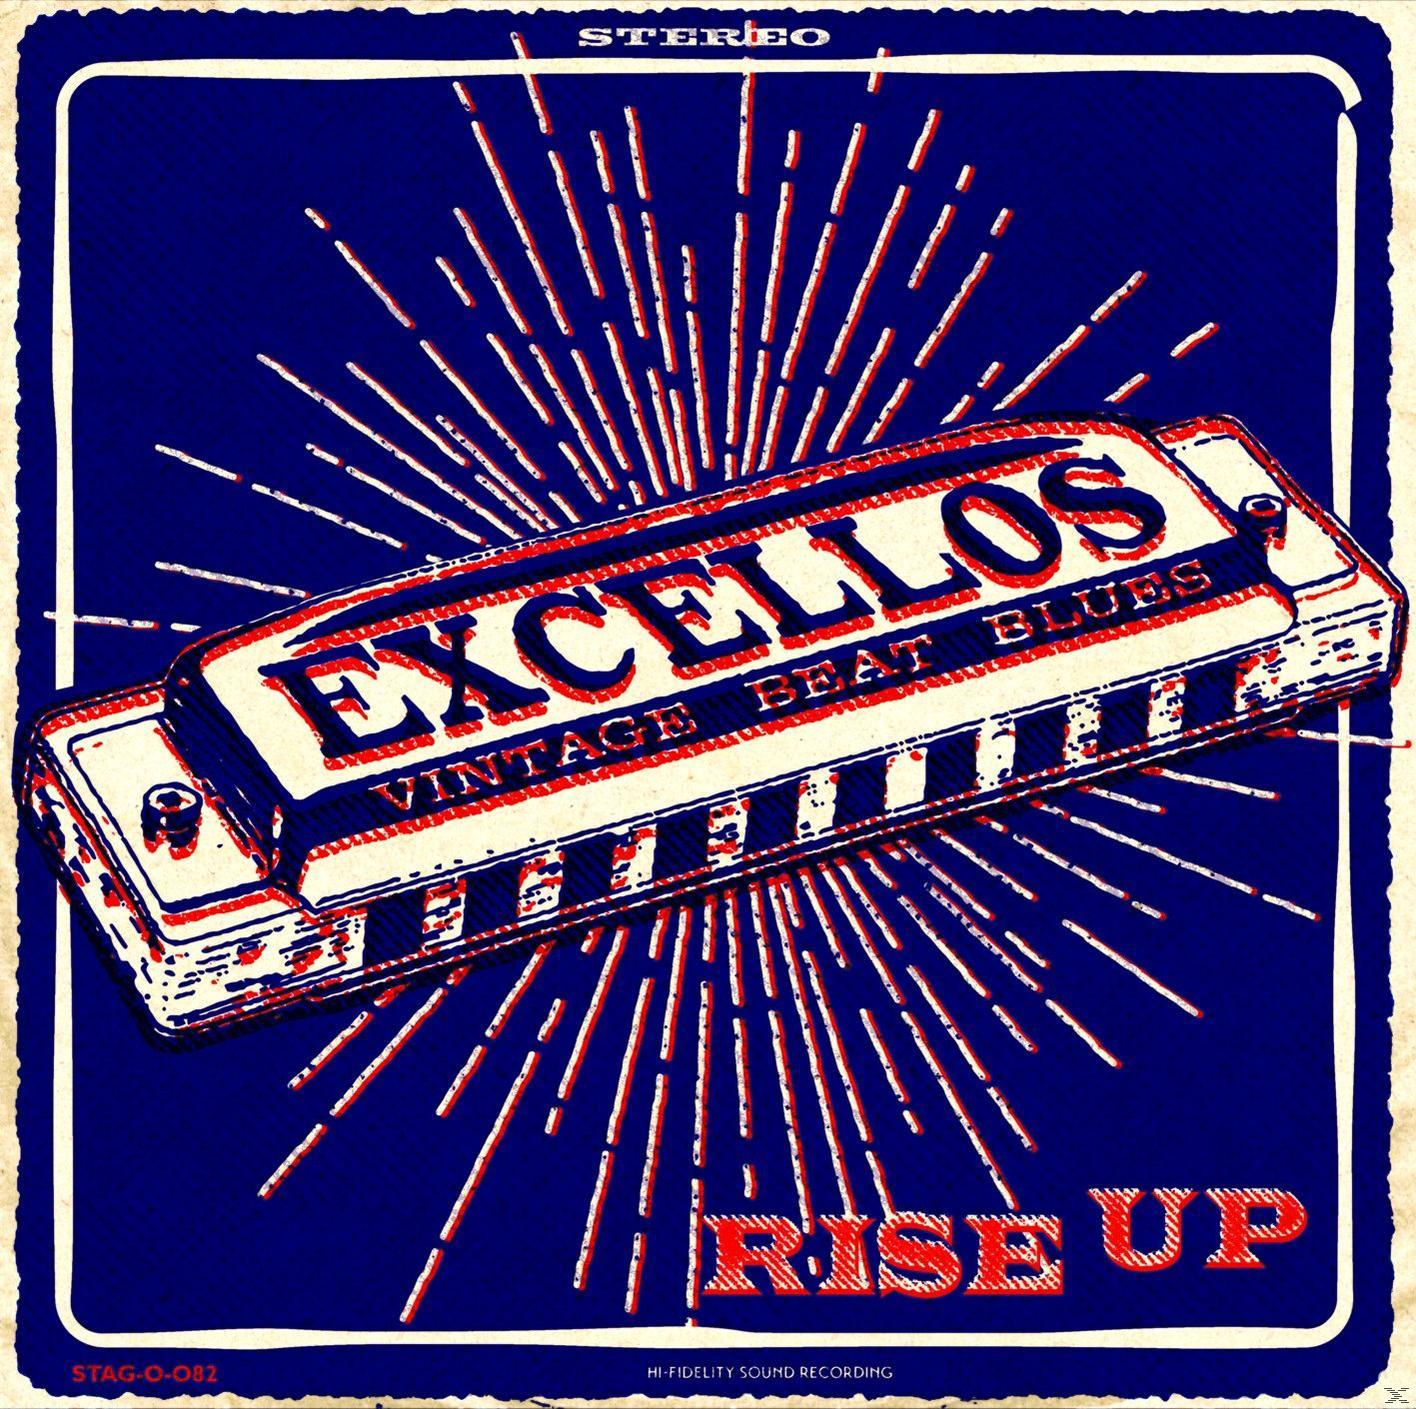 The Excellos - Rise Up (Vinyl) 